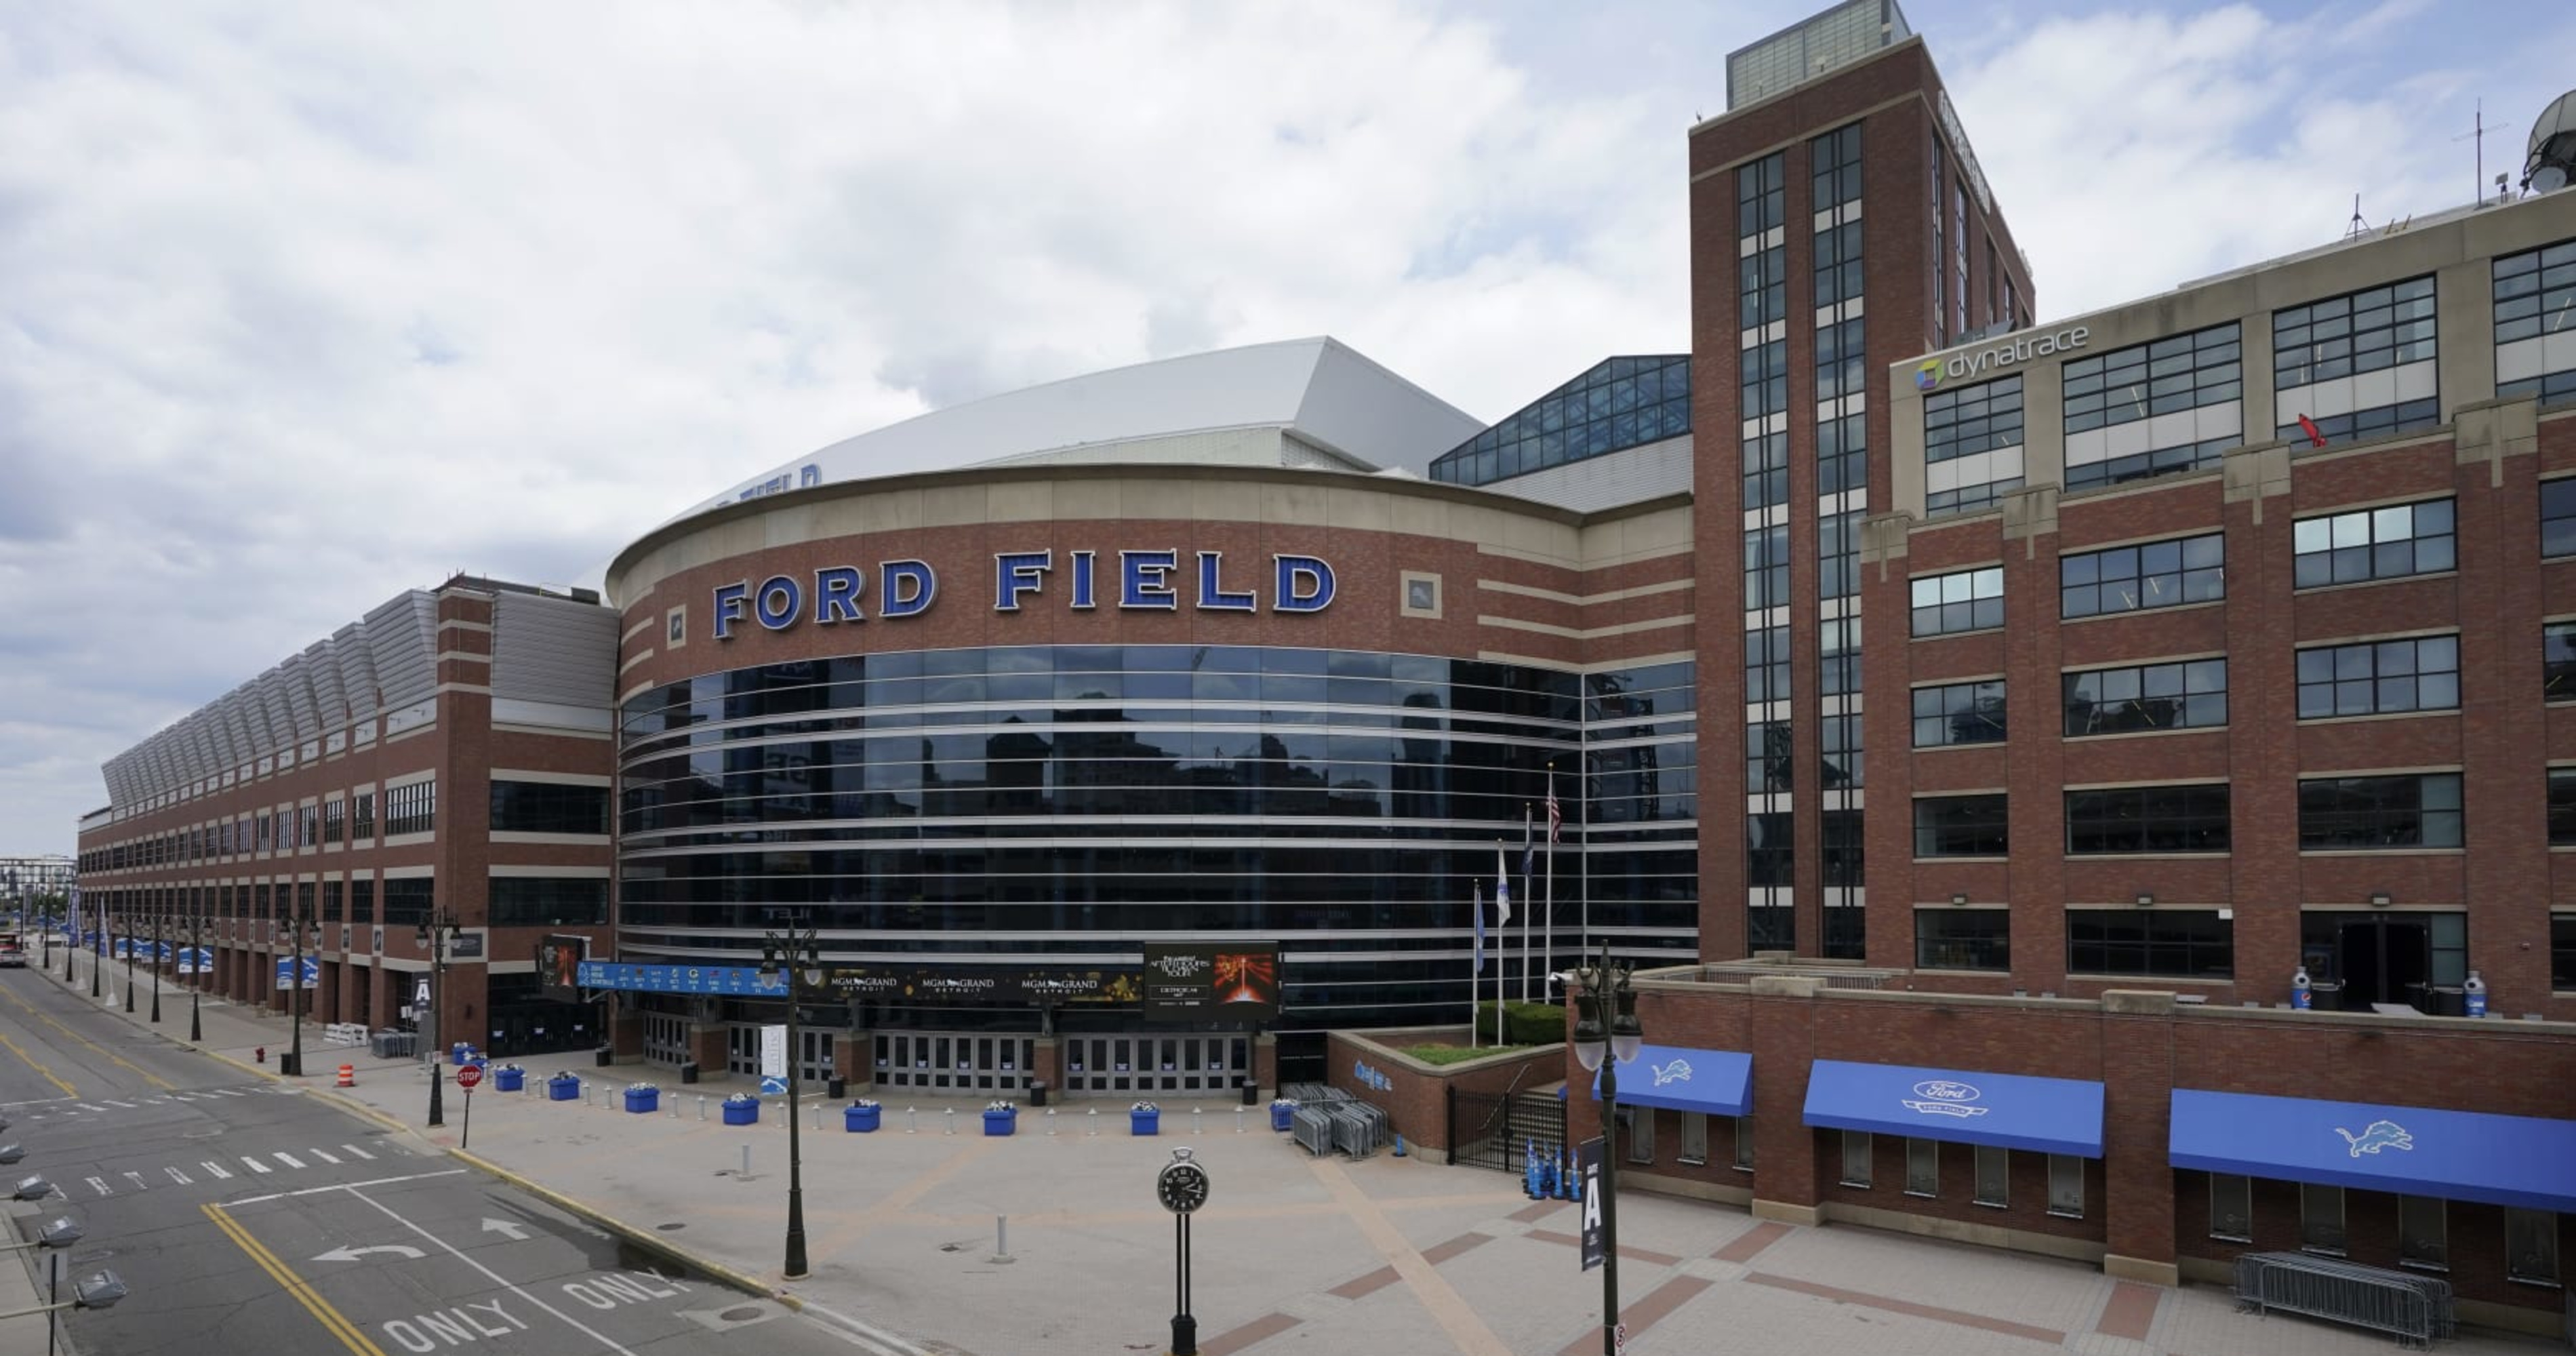 WWE SummerSlam 2023 Announced for Detroit's Ford Field in August News